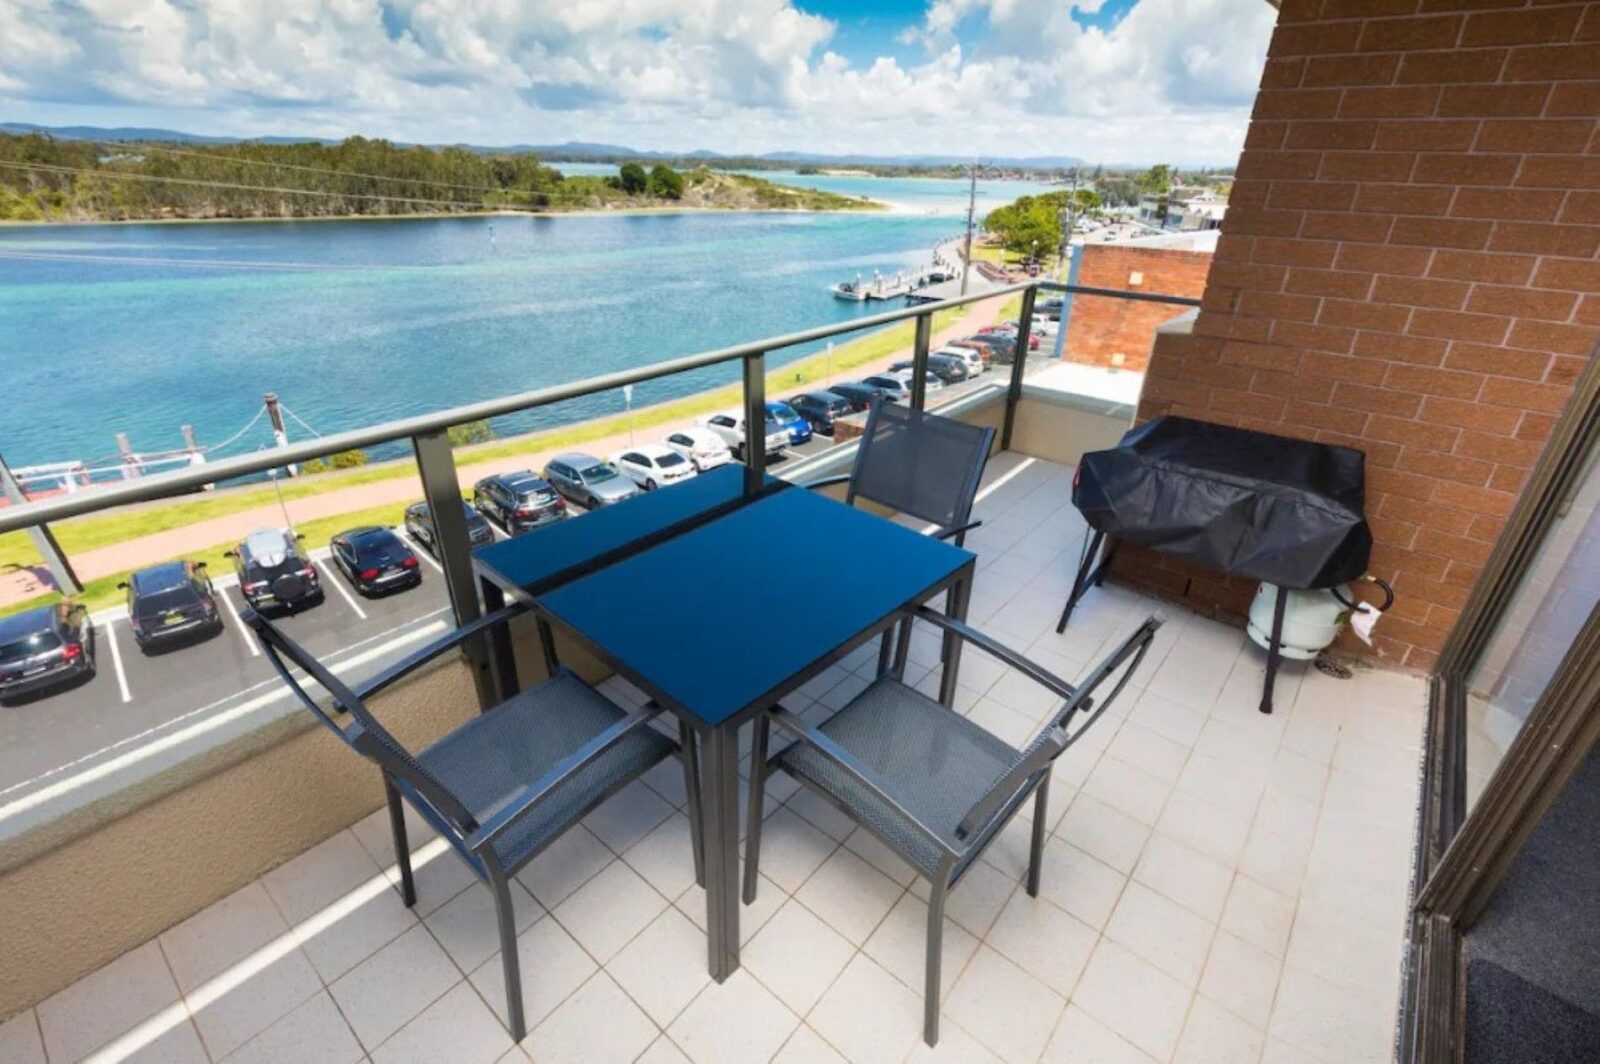 Balcony with lake views, dining setting and BBQ